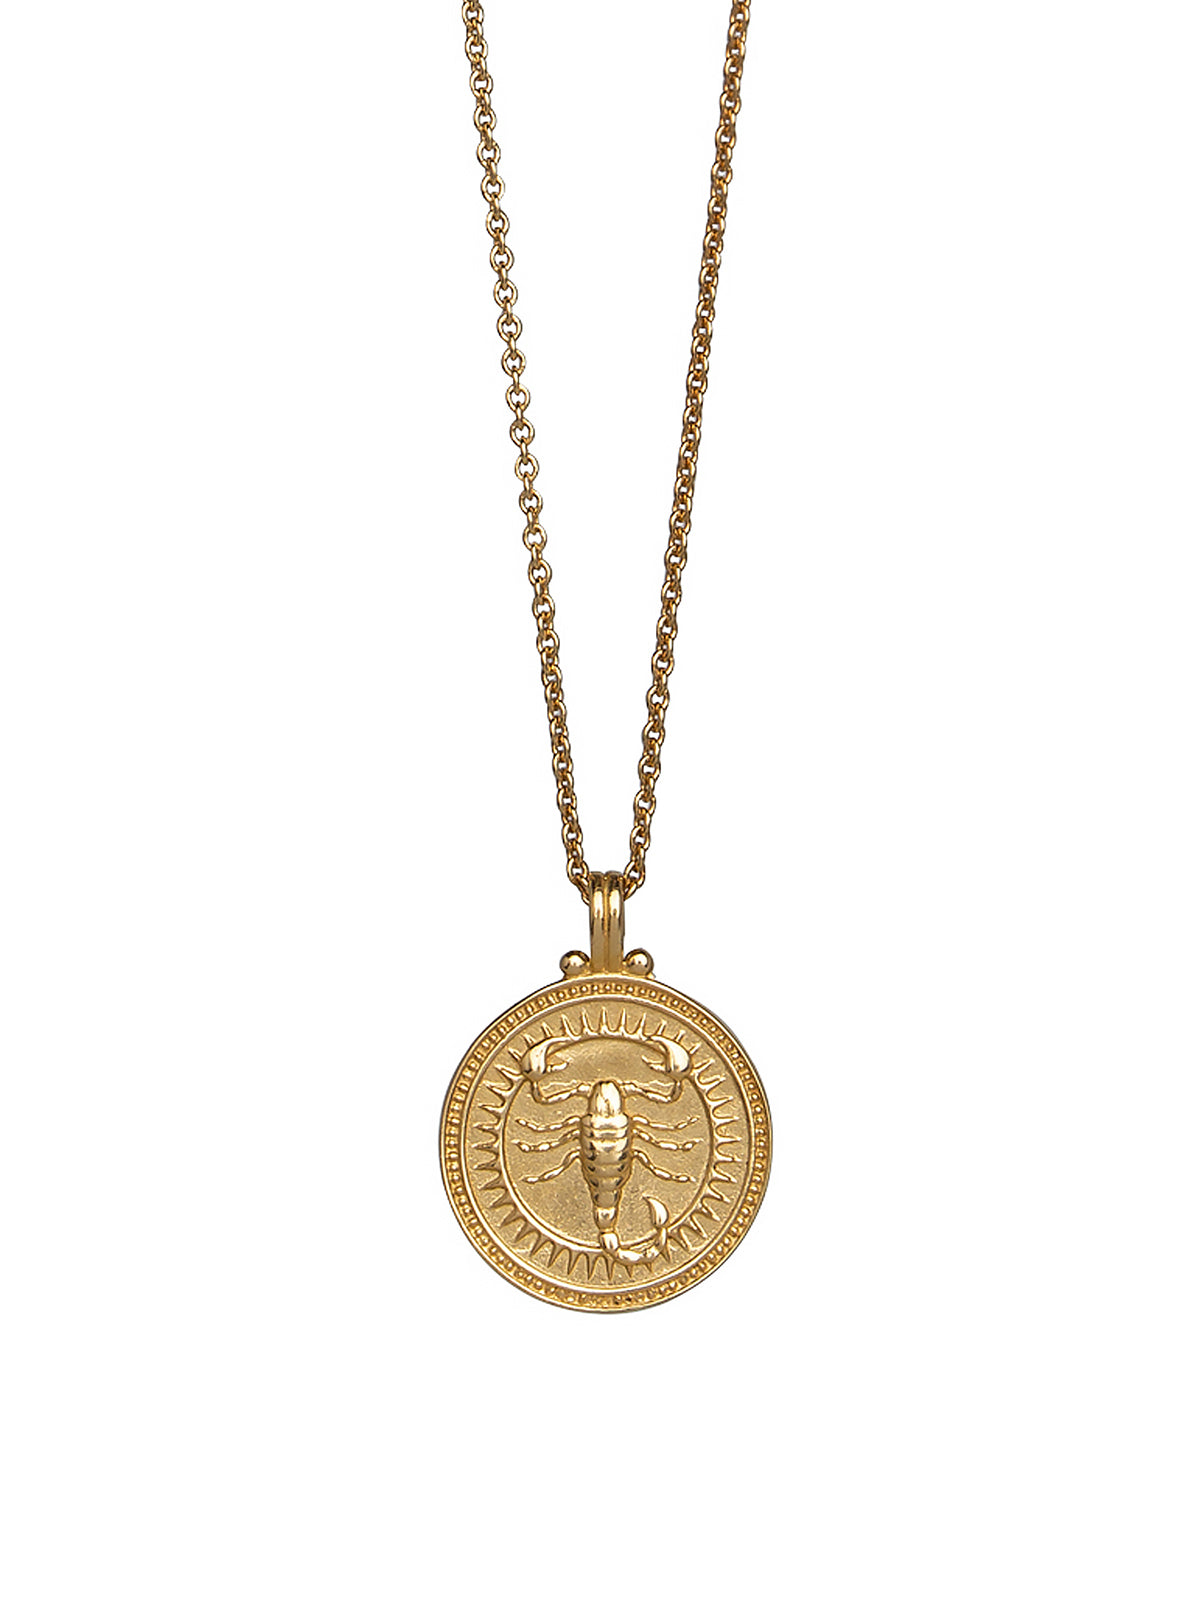 Scorpio. 18ct Solid Gold Star Sign Necklace. The pendant features an Evil Eye on the back to ward off any naughty behavior aimed at you, Our logo and the 750 Hallmark for 18ct Gold.